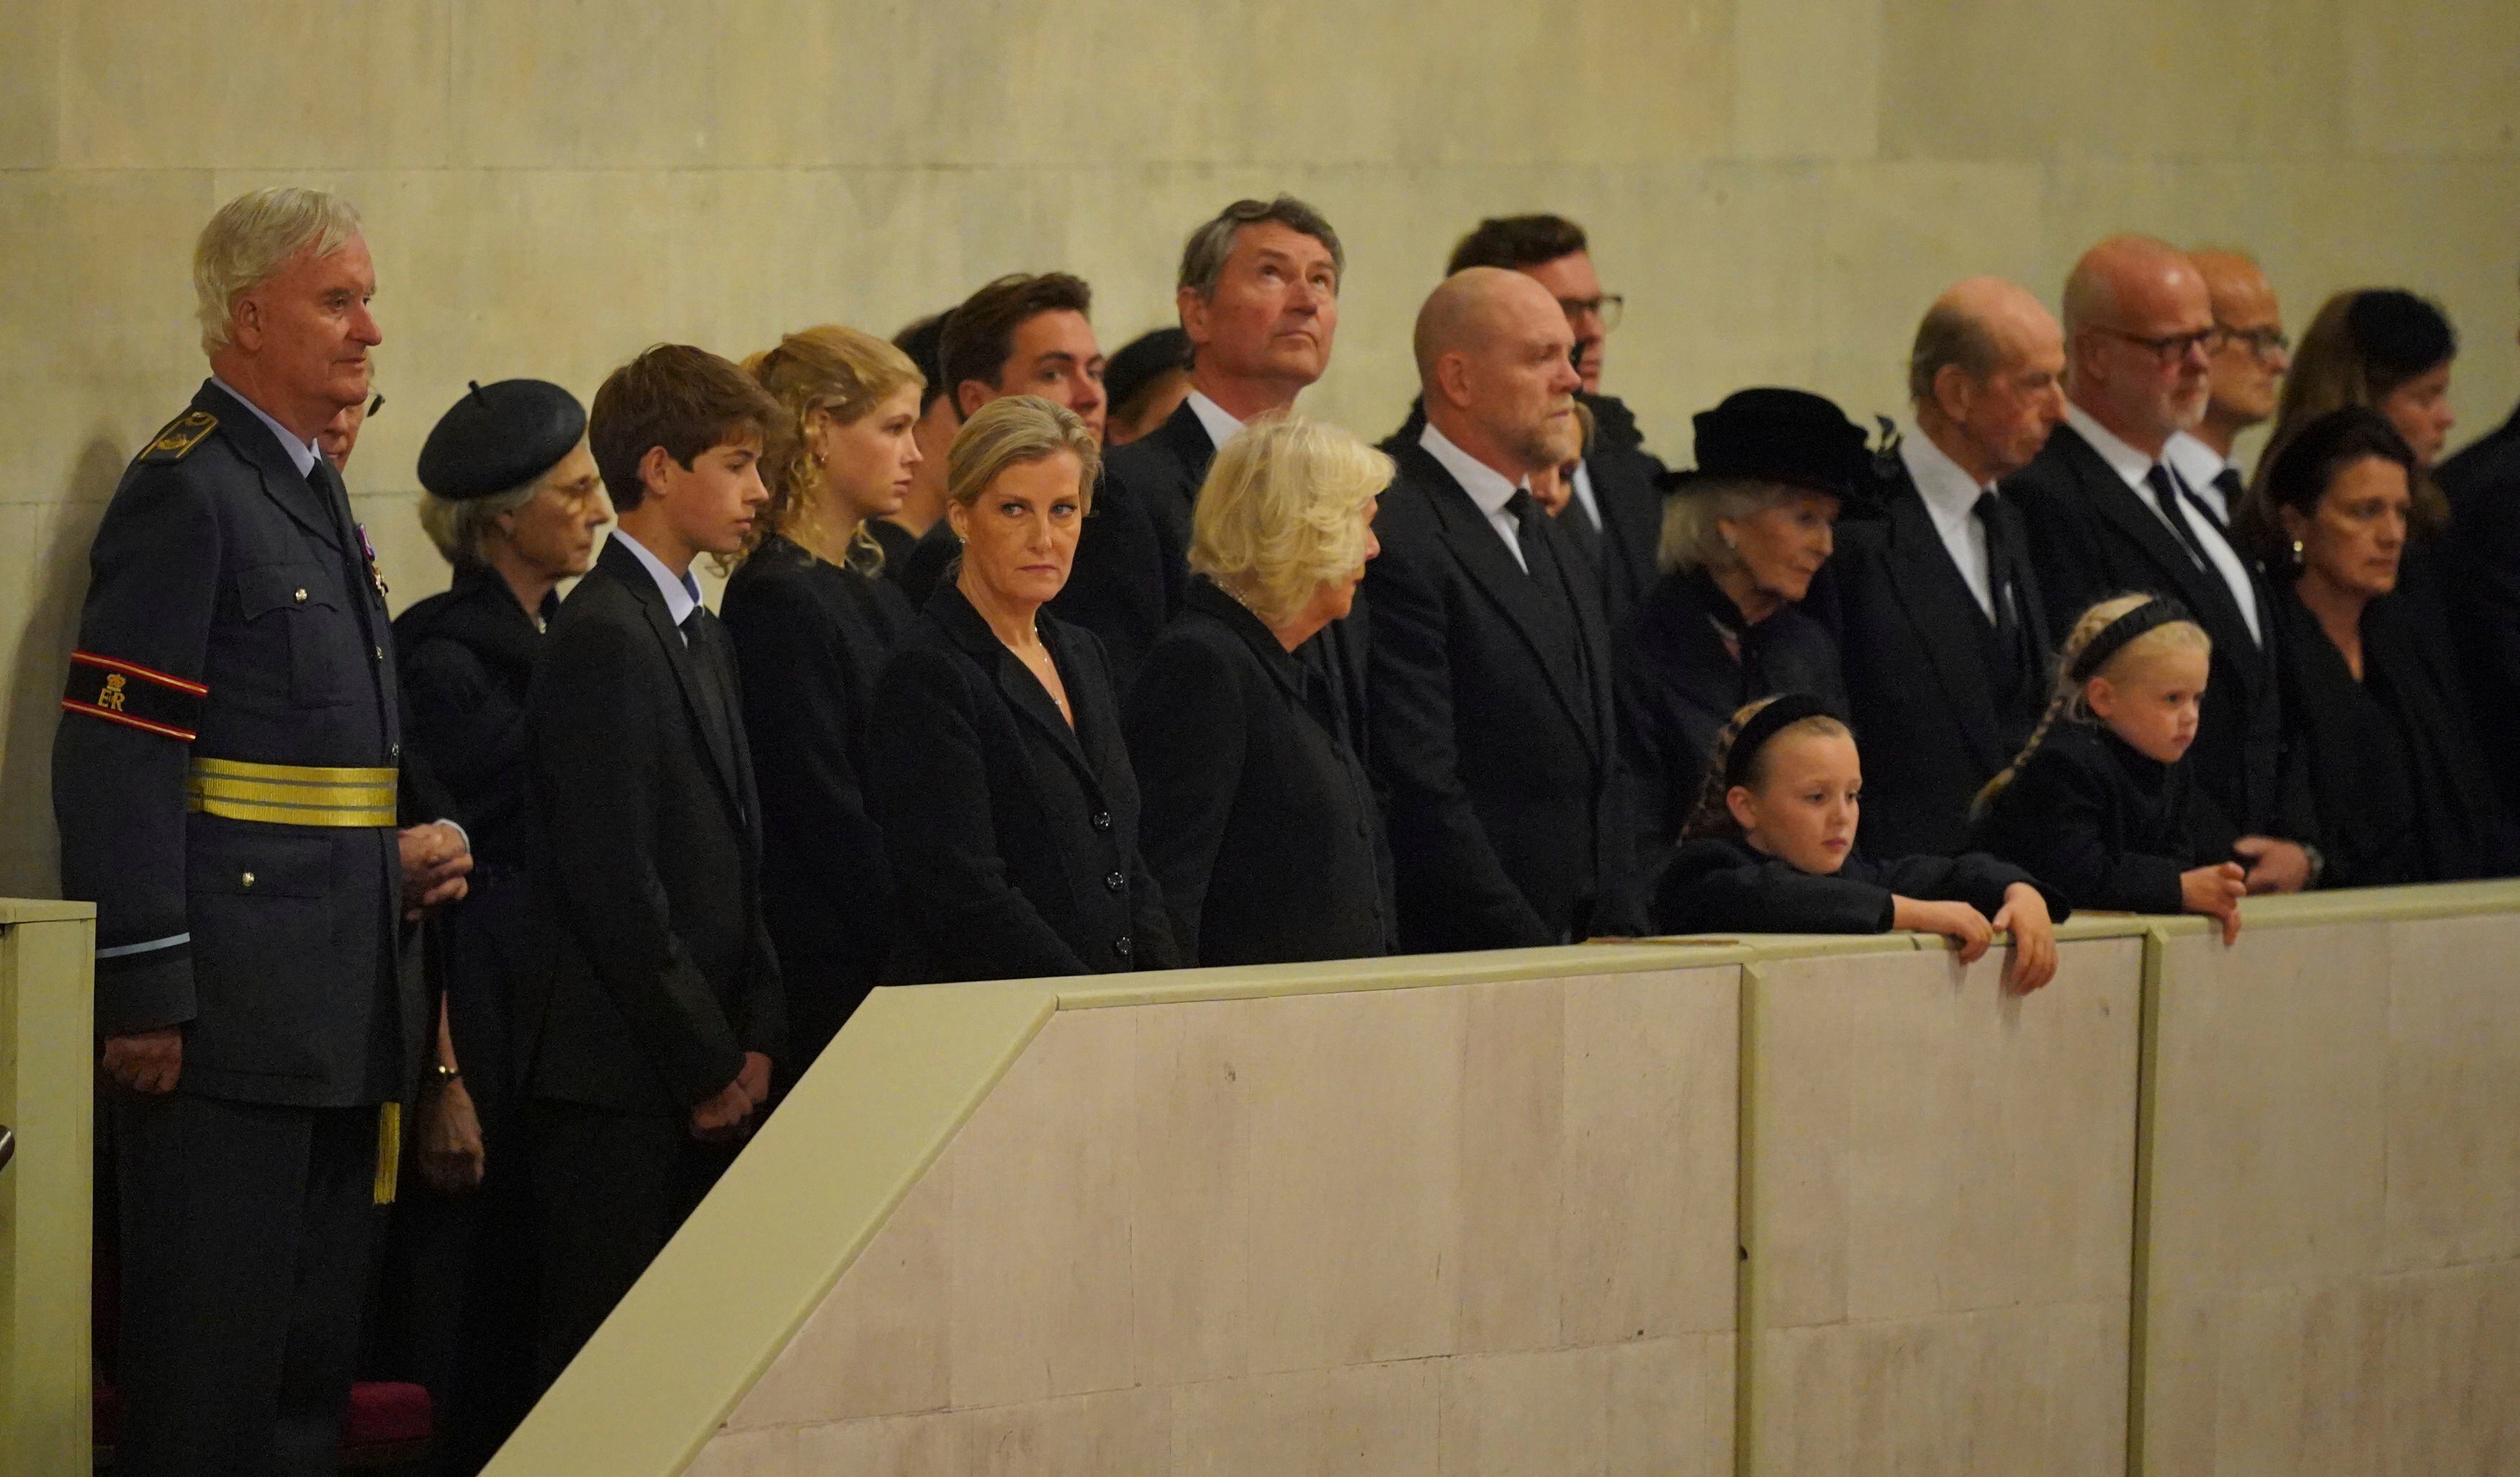 Members of the royal family attend the vigil, including James, Viscount Severn, Lady Louise Windsor, Jack Brooksbank, the Queen Consort, Vice Admiral Sir Tim Laurence, and Zara, Mike, Mia and Lena Tindall